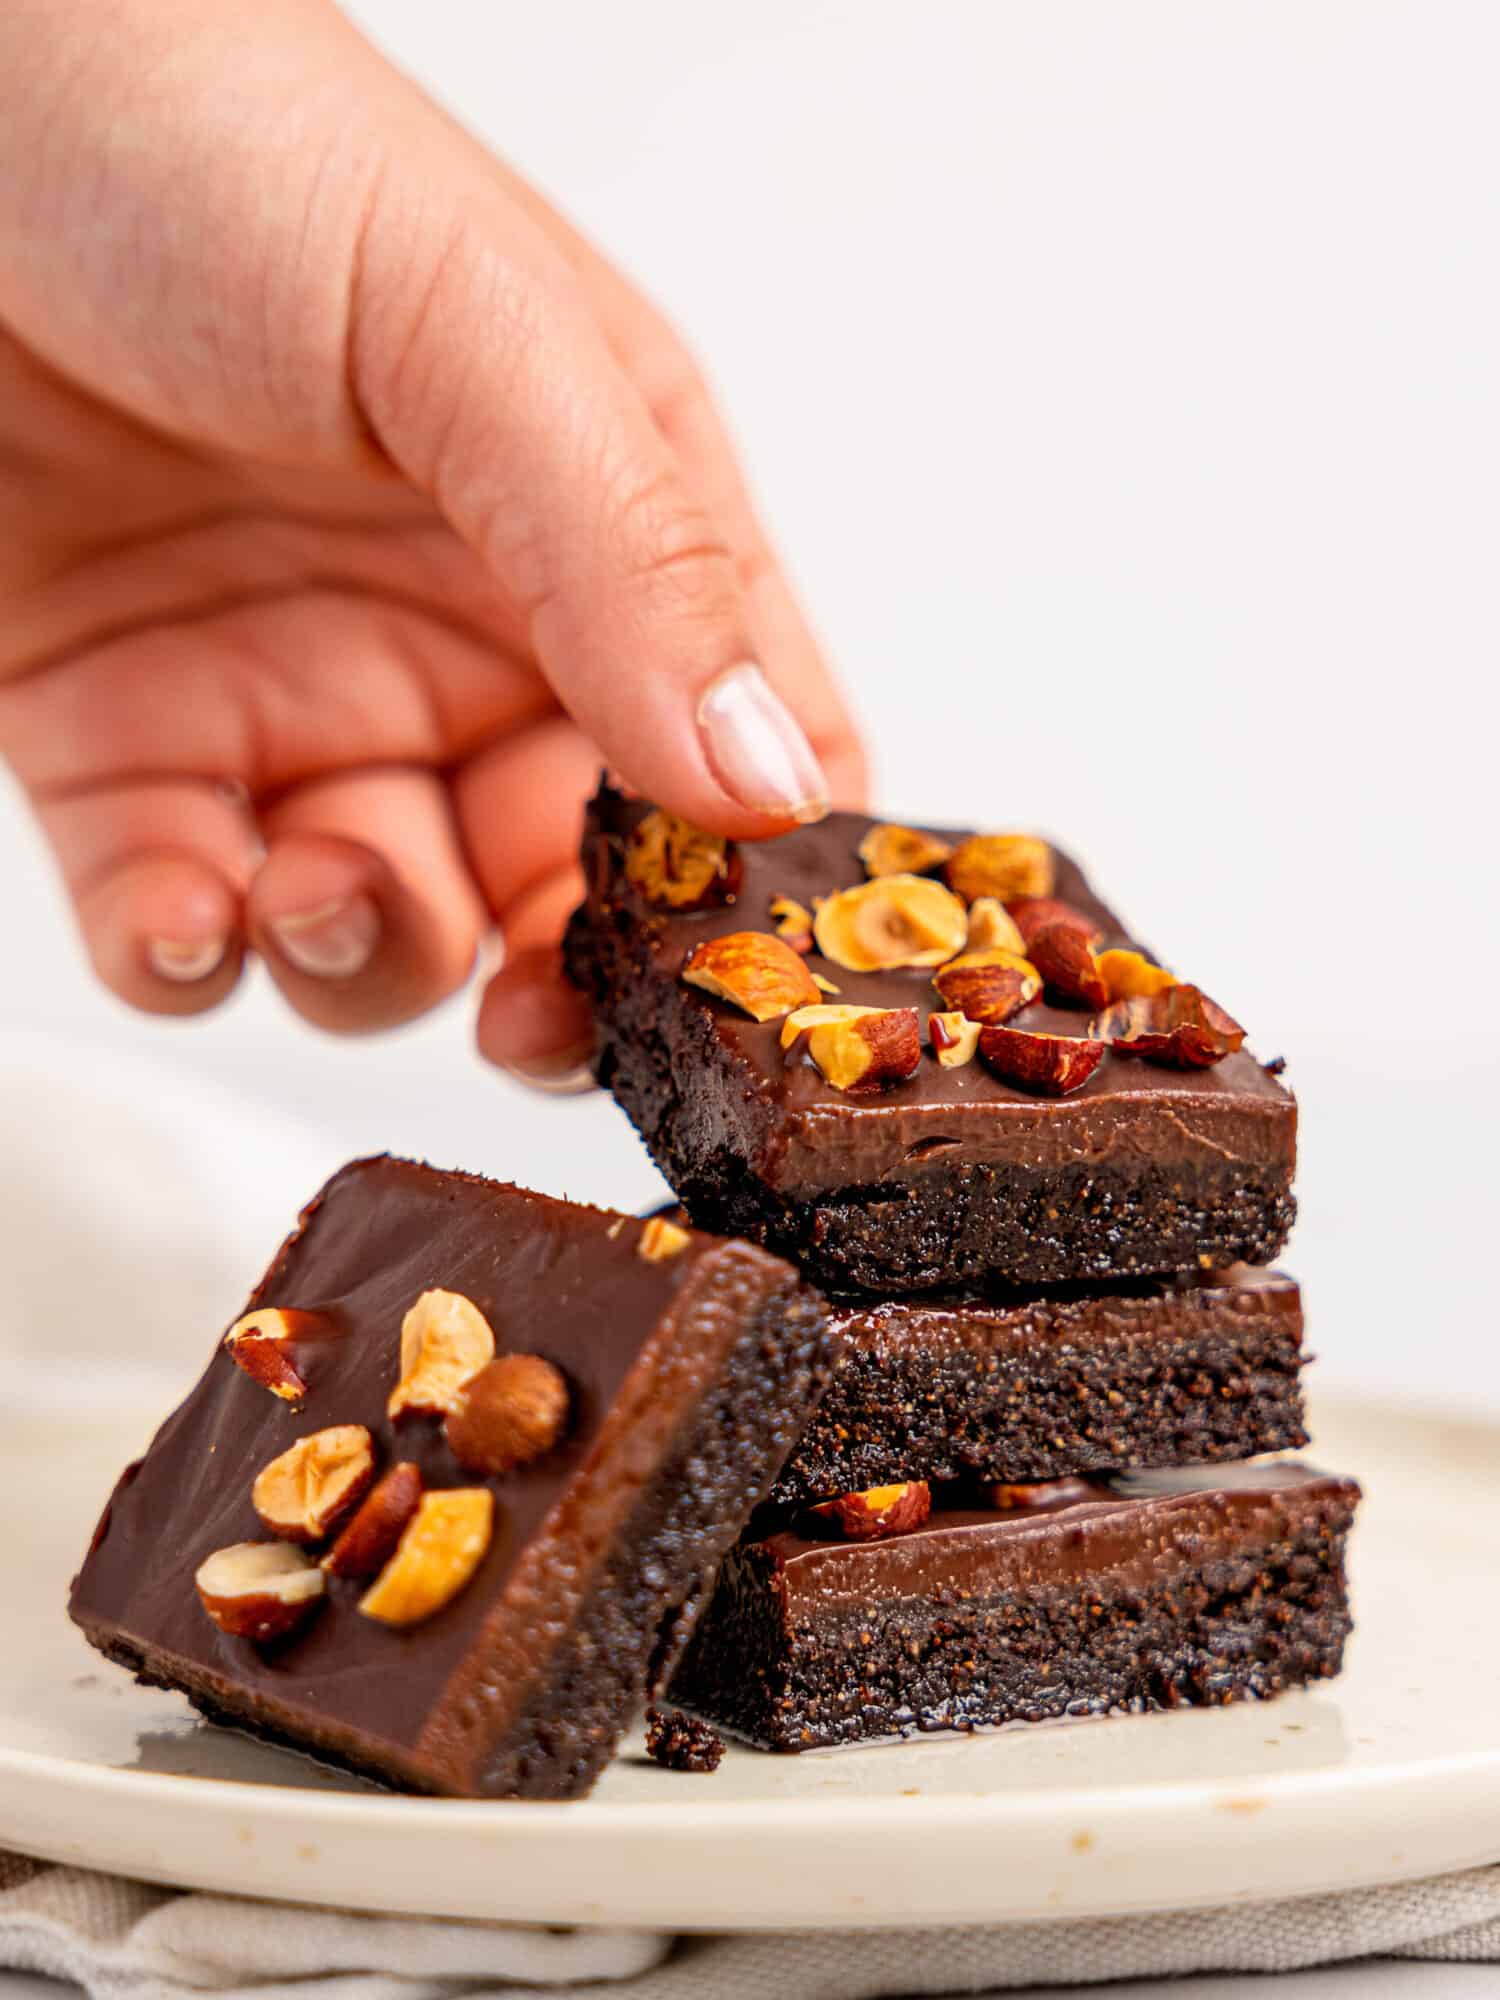 Four No-Bake Brownies stacked on a plate, a handing holding the top brownies.